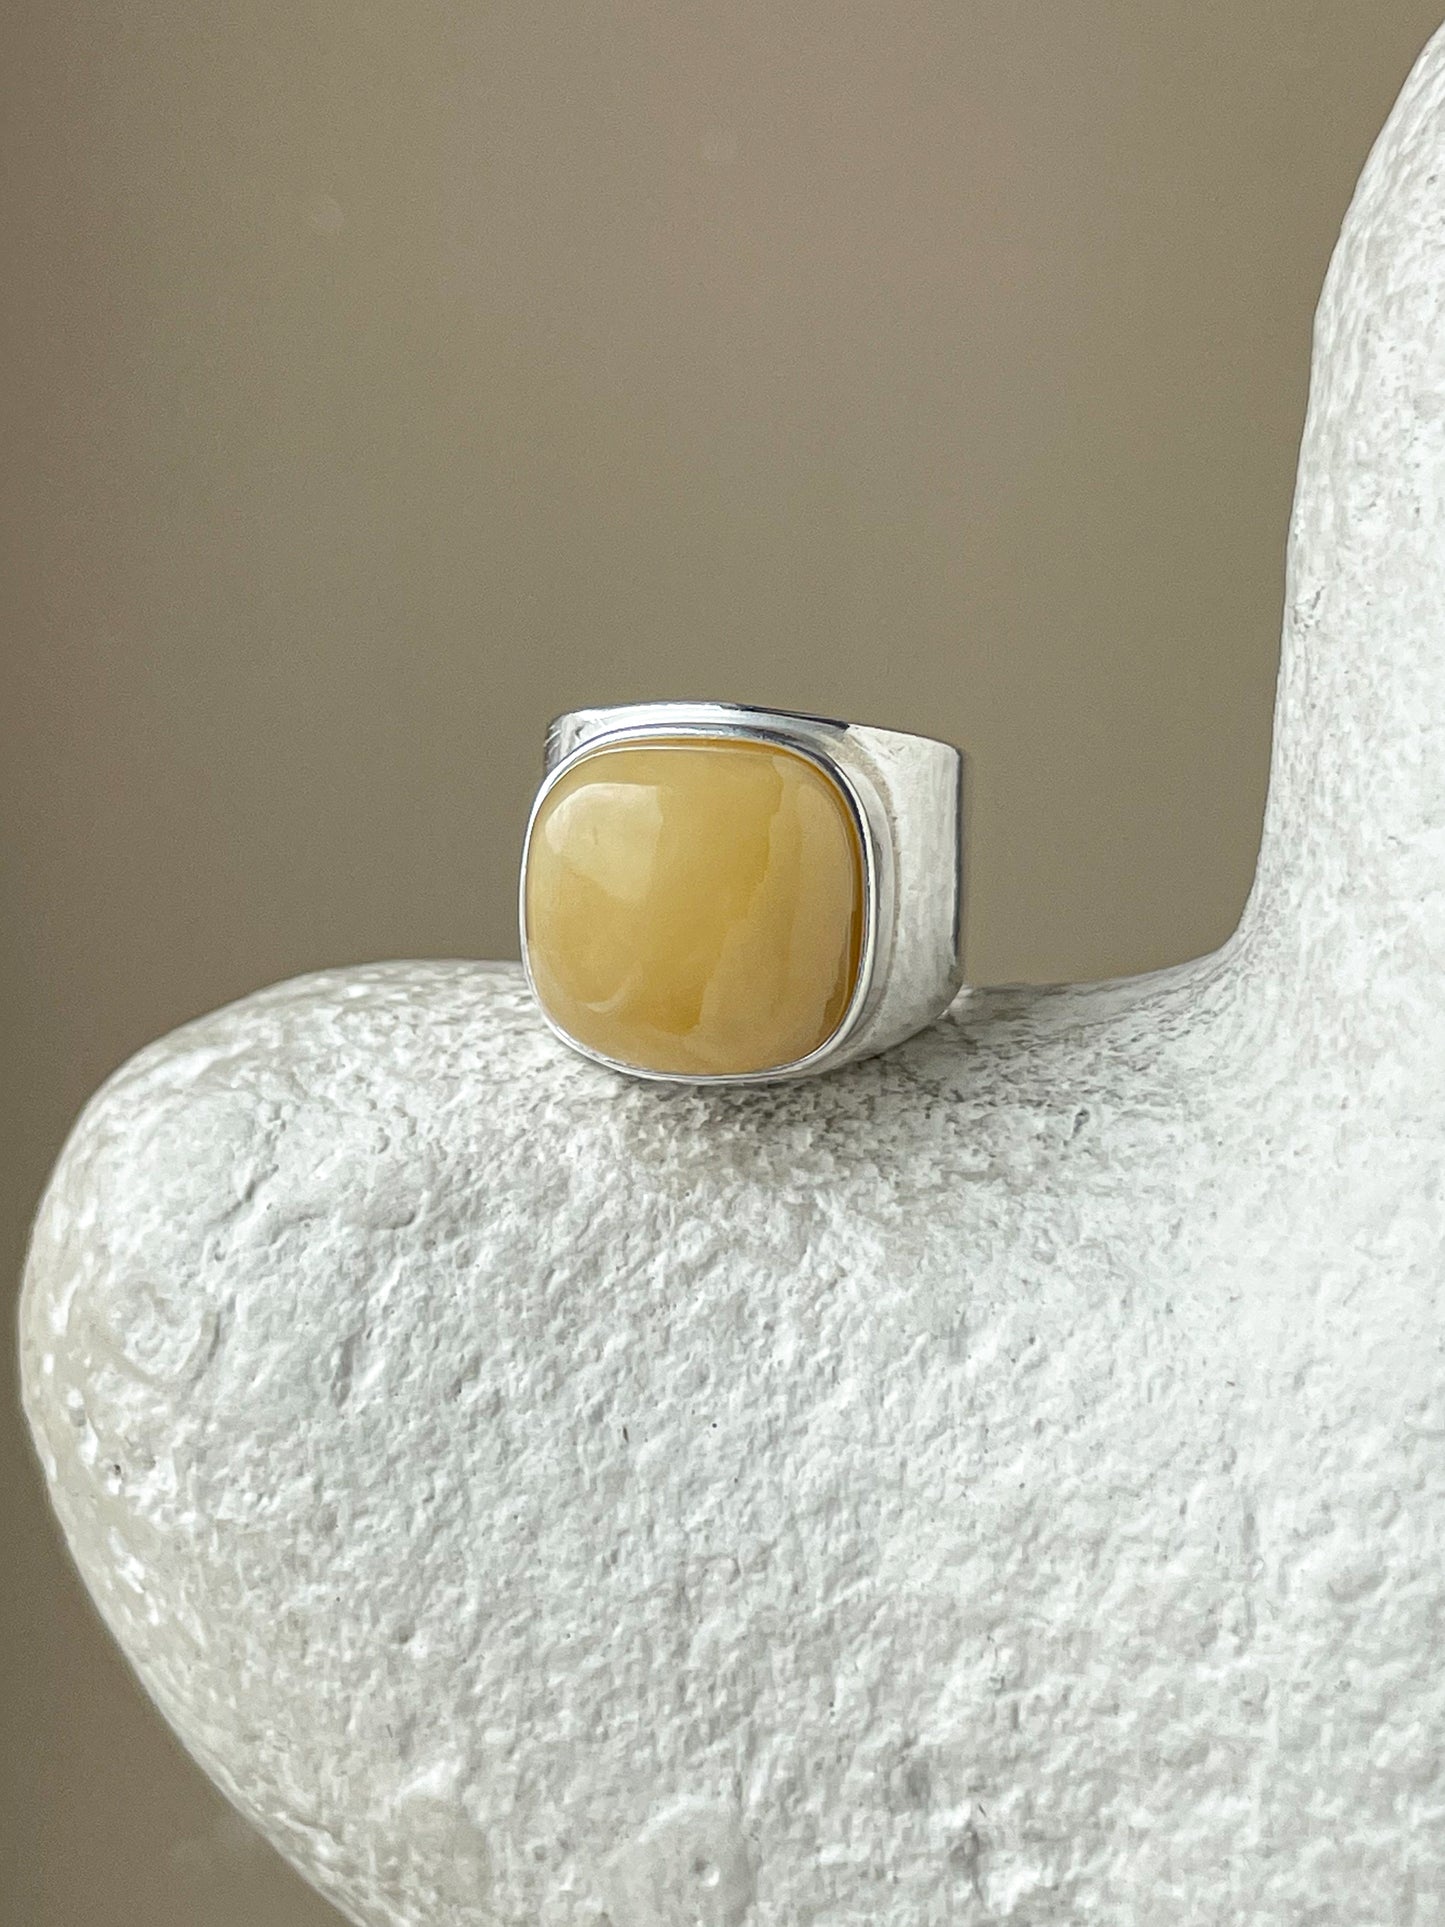 Matte amber ring - Sterling silver - Statement ring collection - Size 6 3/4